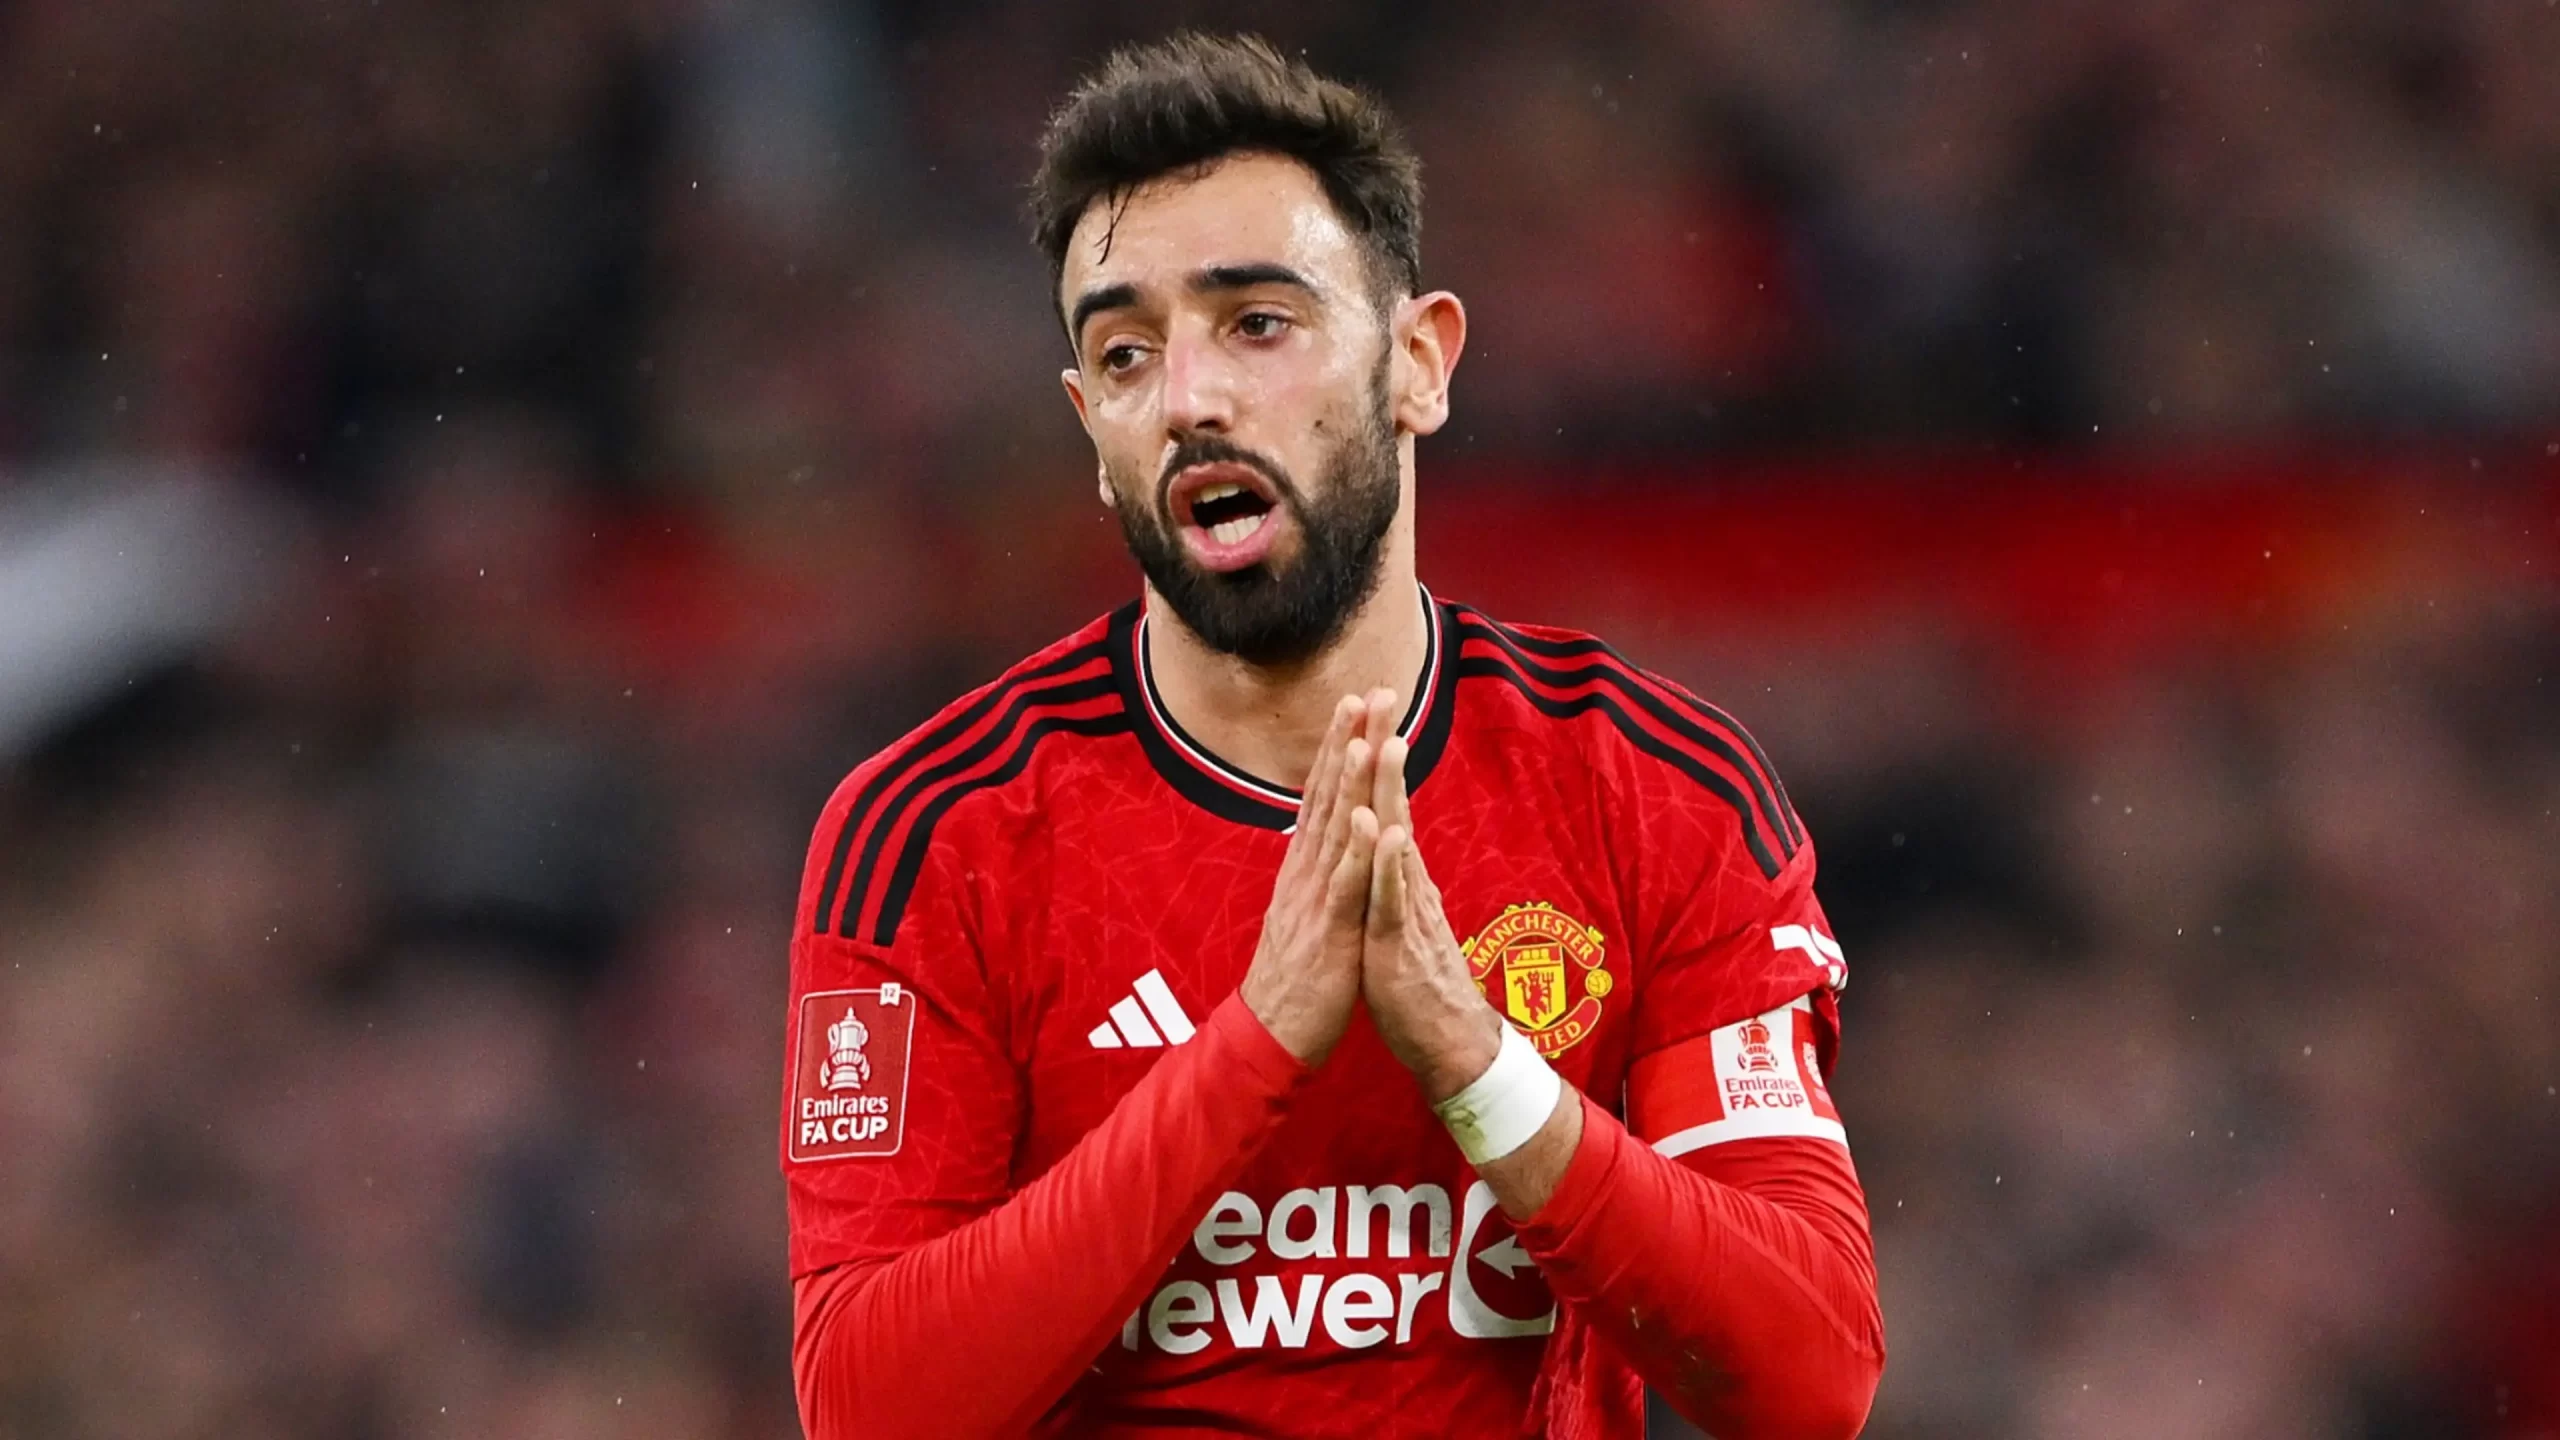 Manchester United to swap Fernandes in shock transfer move